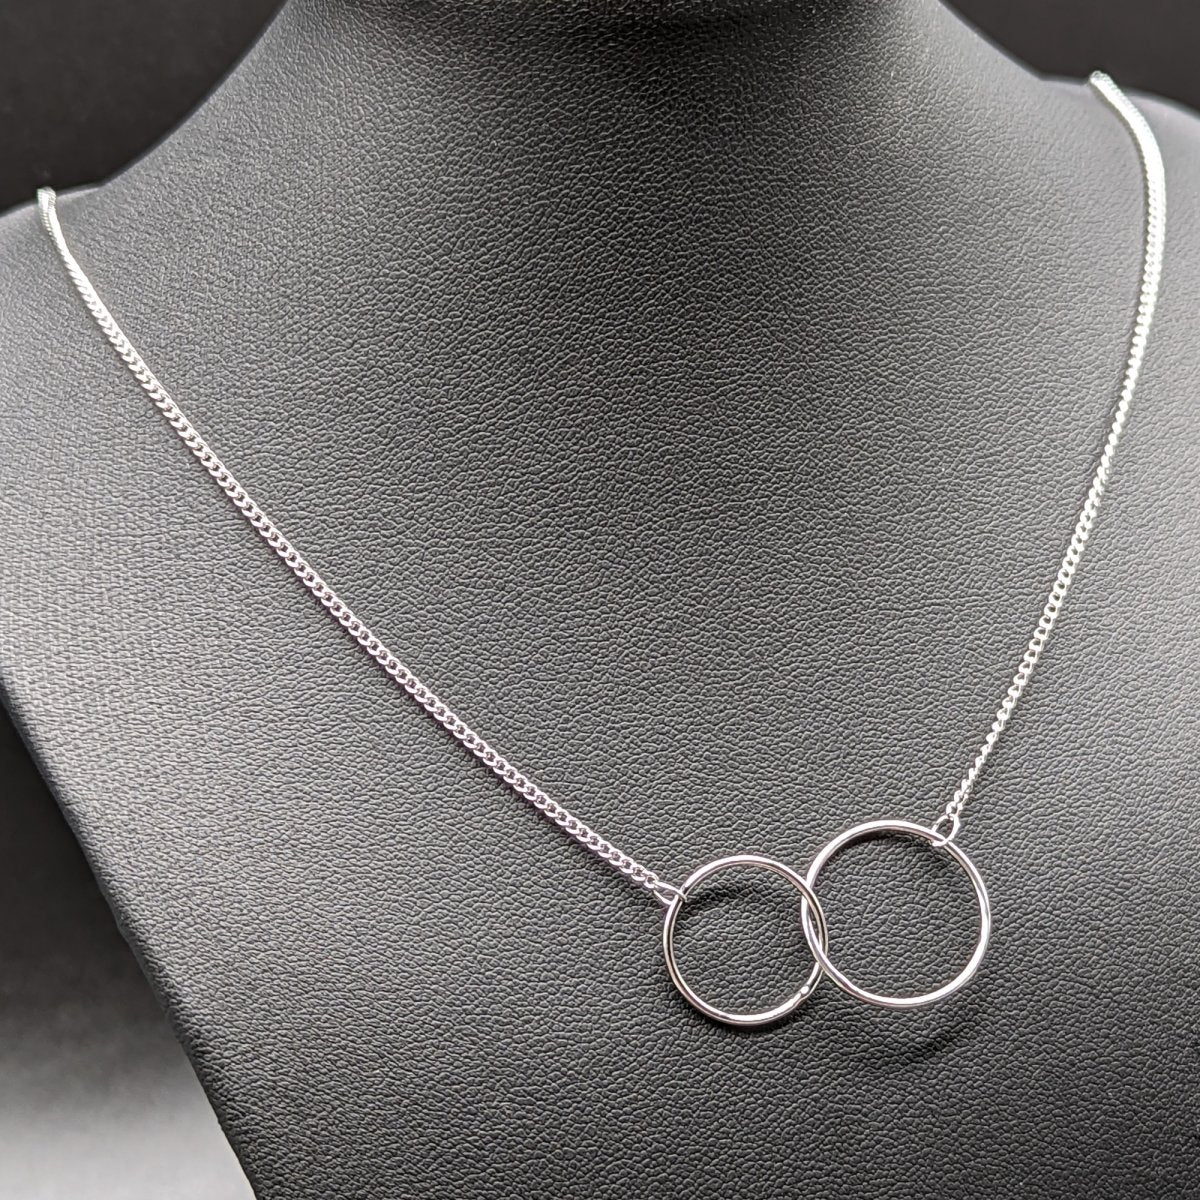 Gift for Daughter - Interlocking Circles Necklace - Meaningful Cards